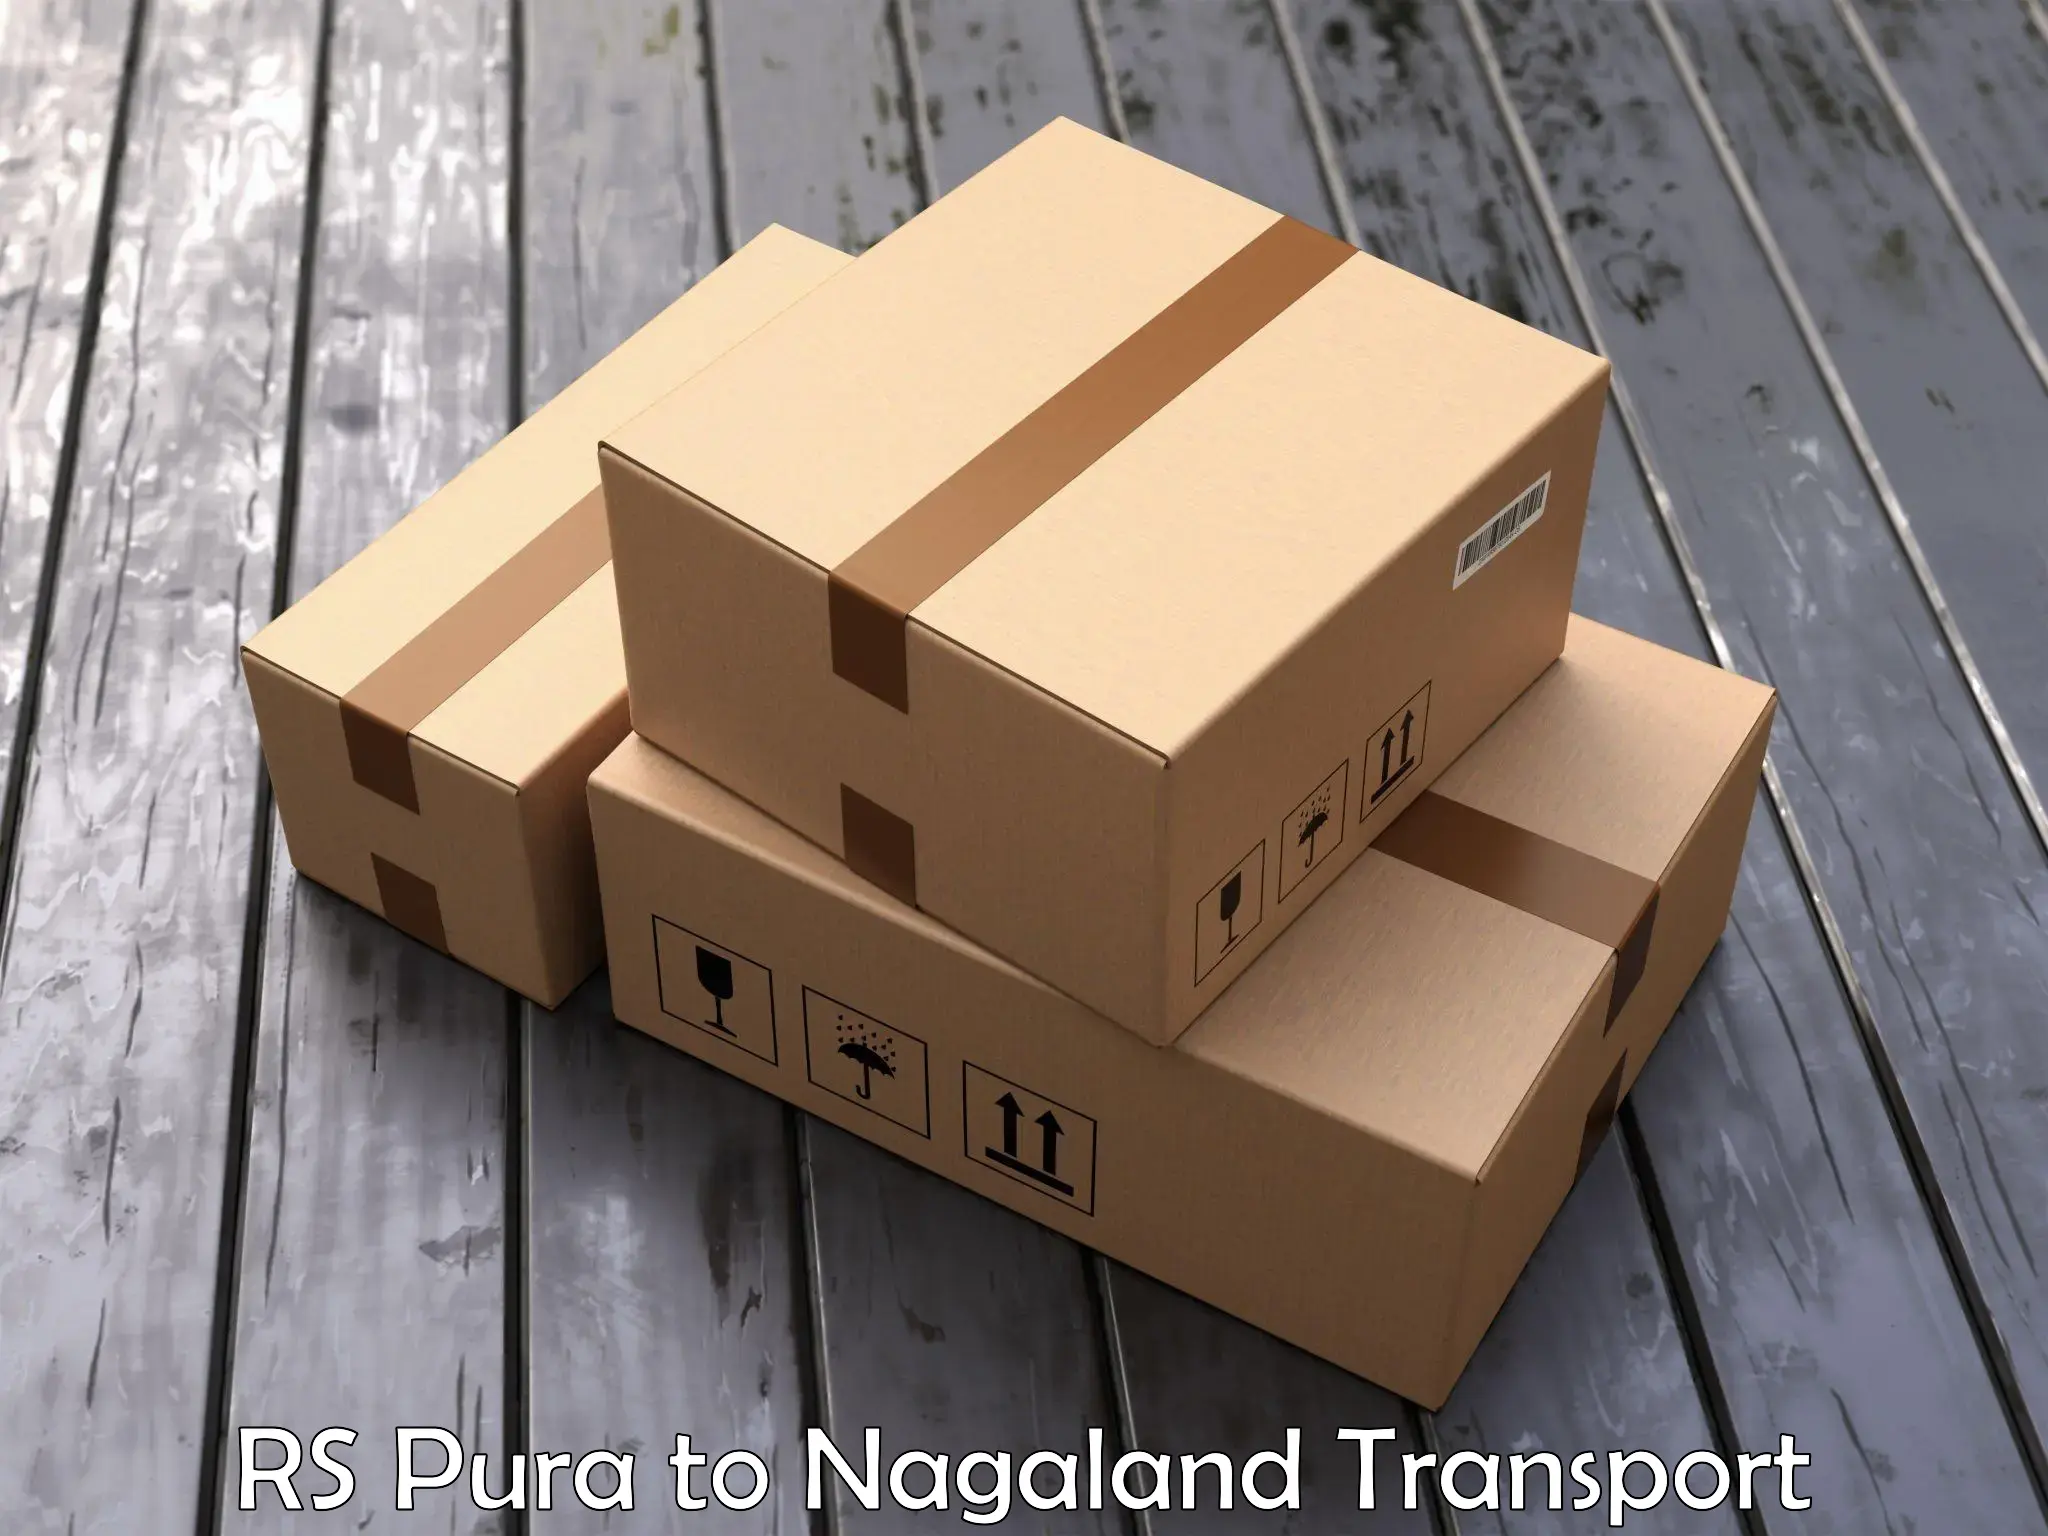 Luggage transport services RS Pura to Nagaland